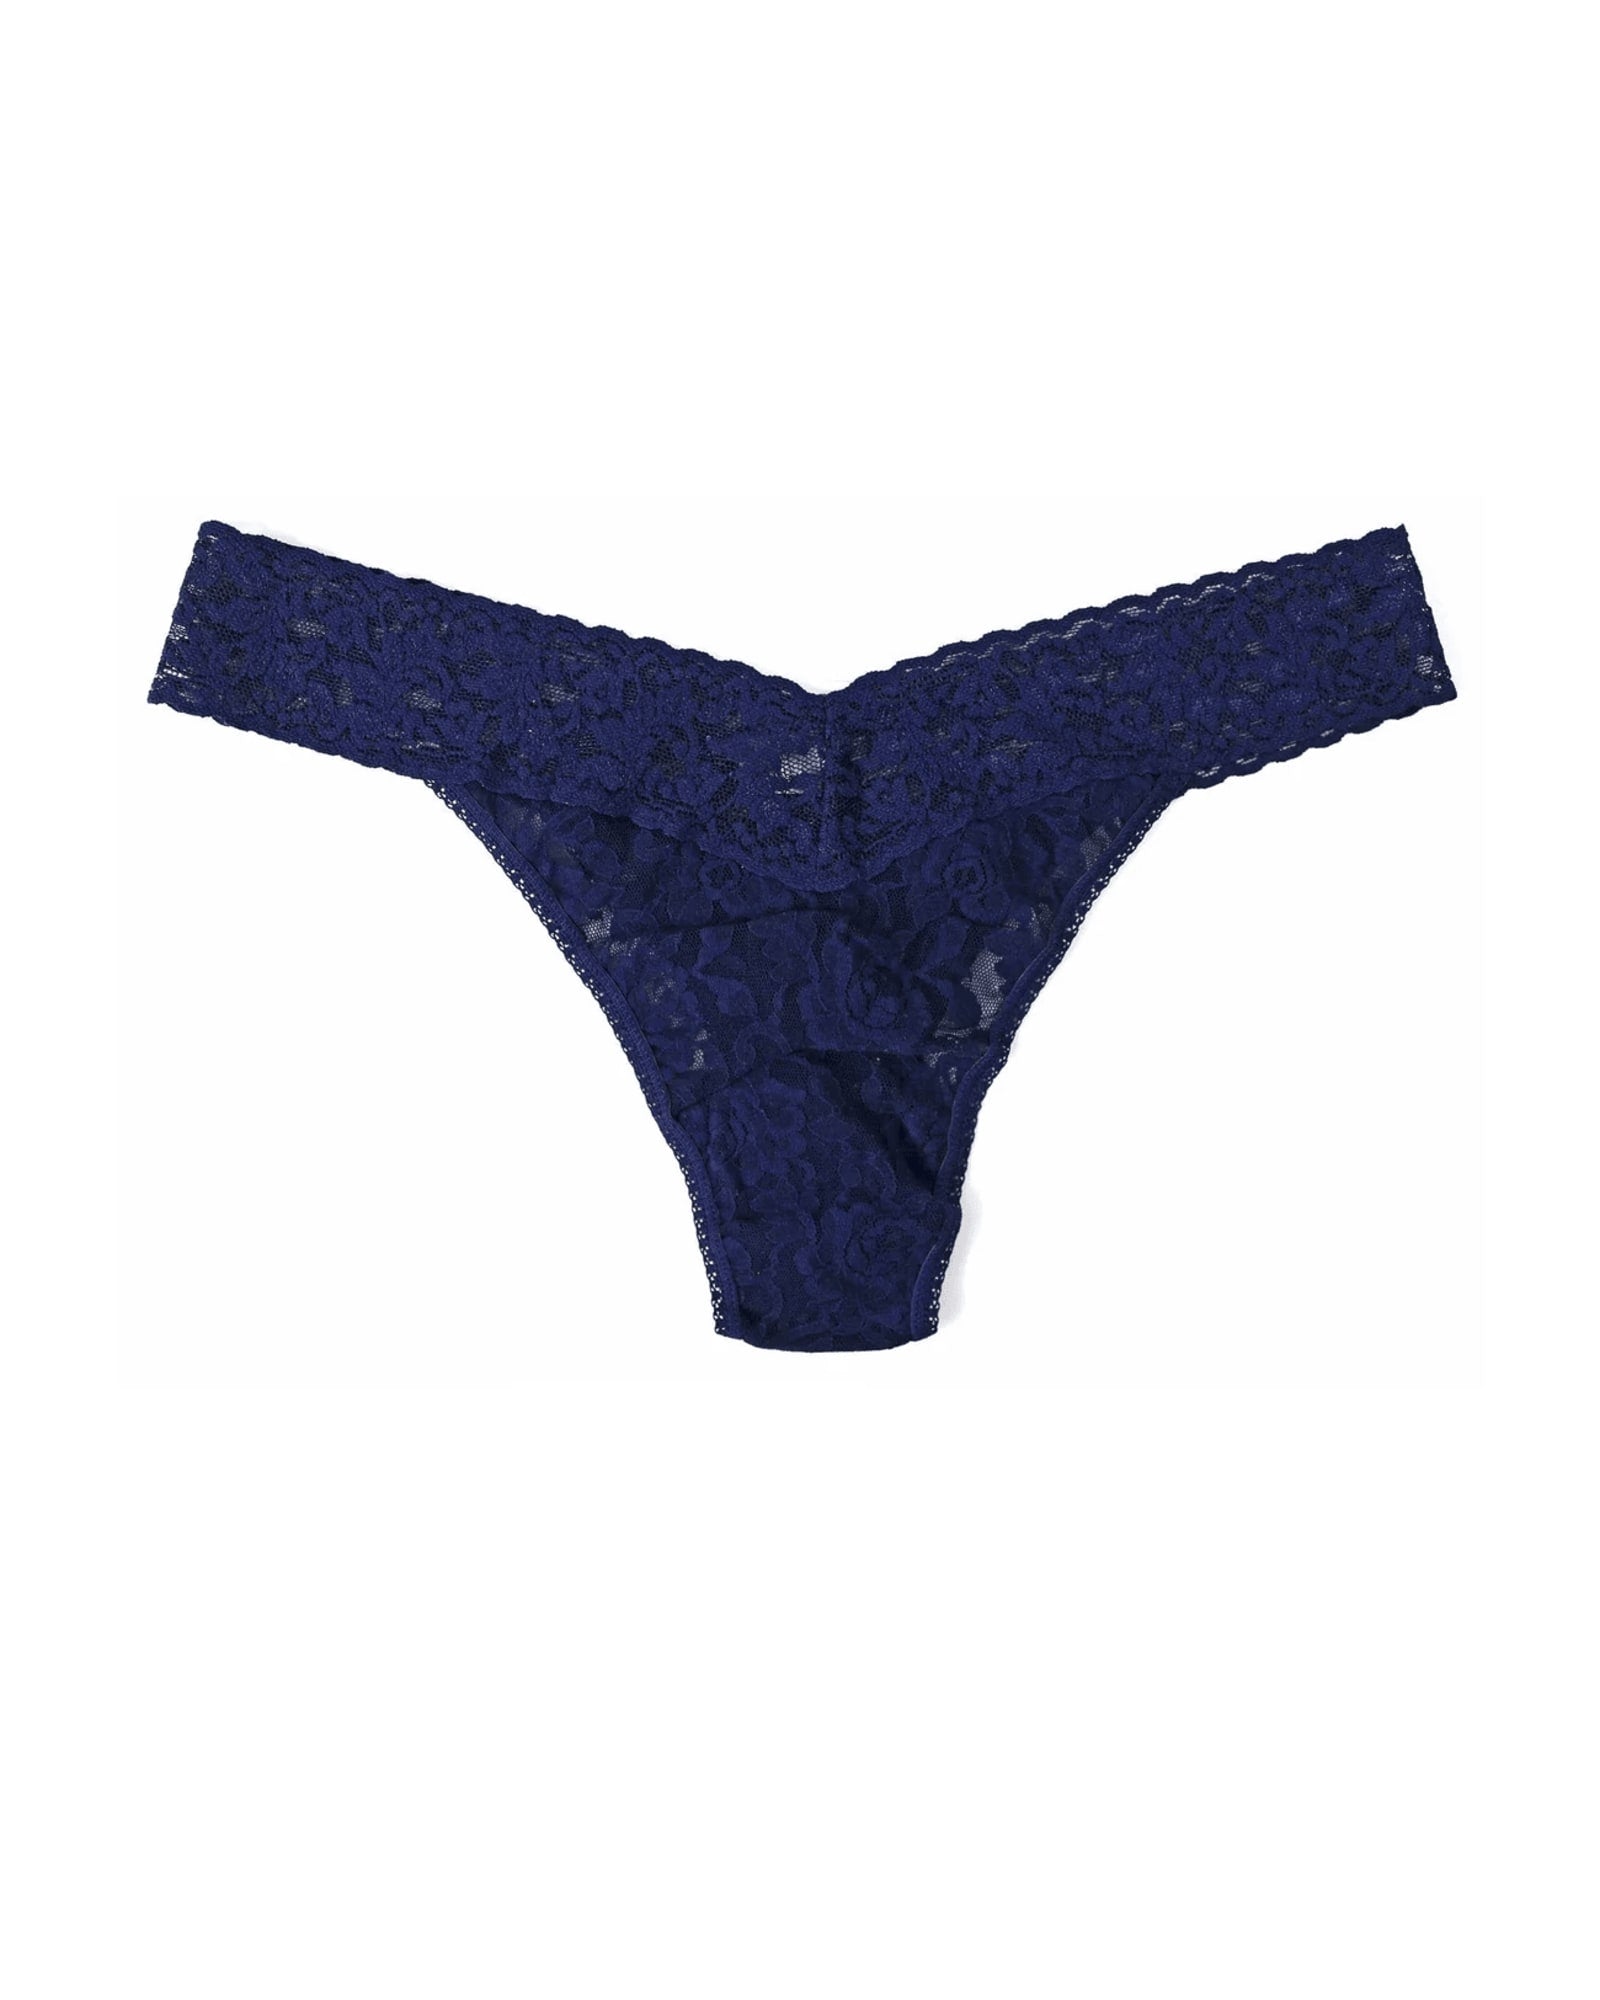 Microfiber and Wide Lace Band Thong Panty - Midnight blue